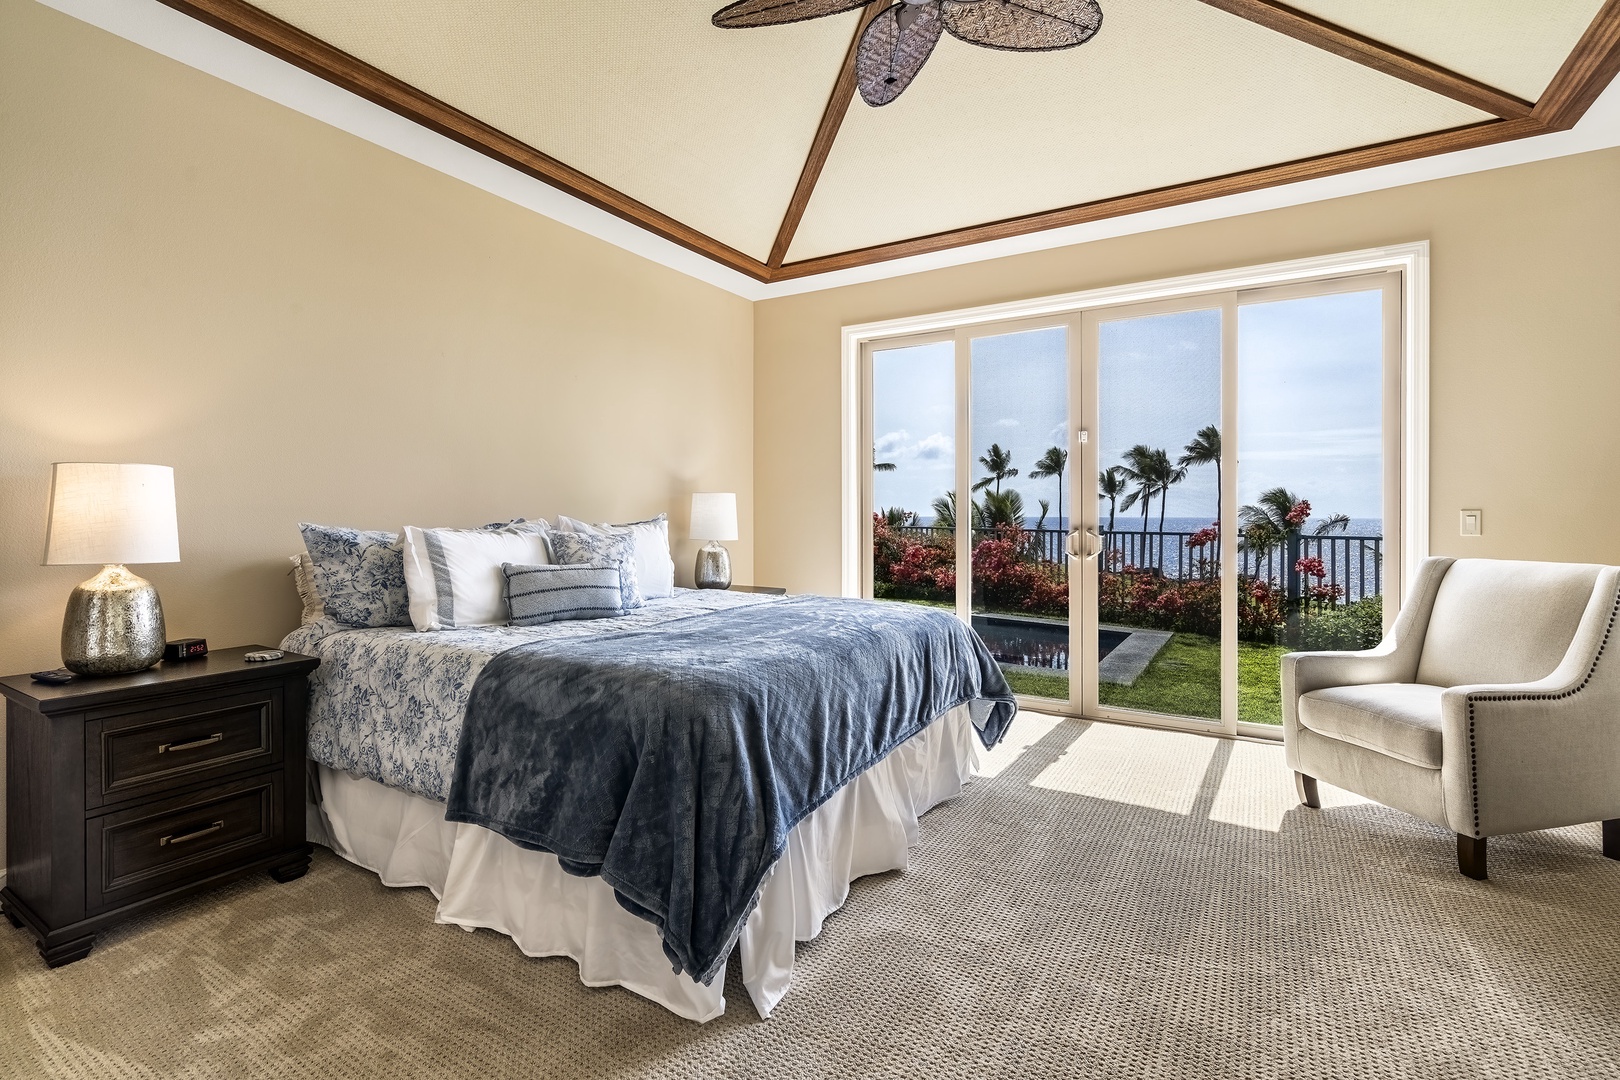 Kailua Kona Vacation Rentals, Green/Blue Combo - Primary bedroom offering a King Bed, A/C, Lanai Access, TV and ensuite